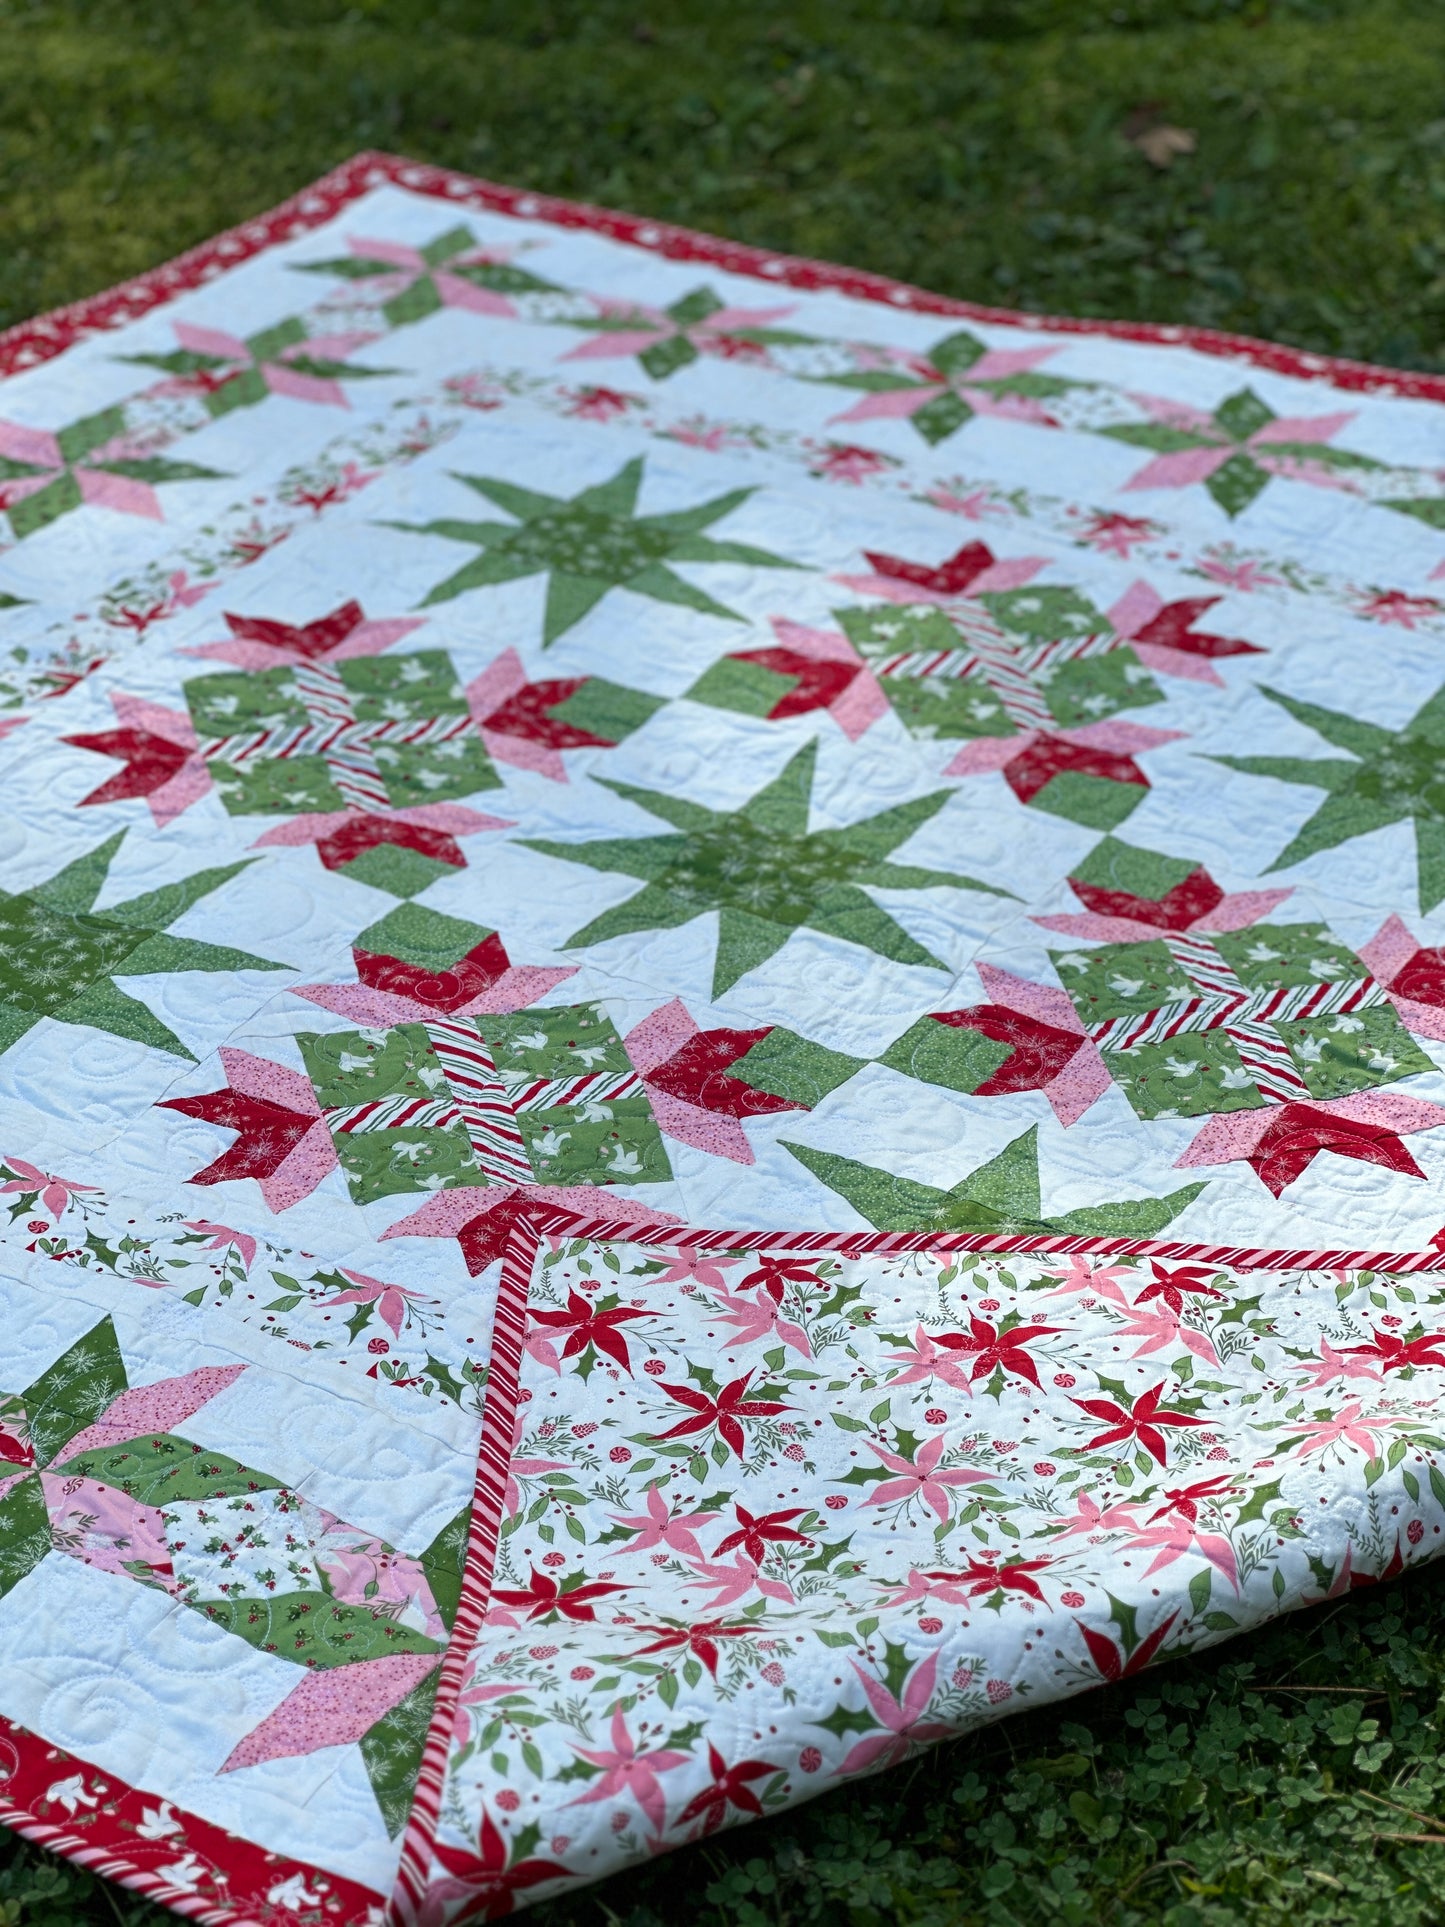 NEW! Once Upon a Christmas "Christmas Joy" Quilt Pattern (Downloadable PDF)